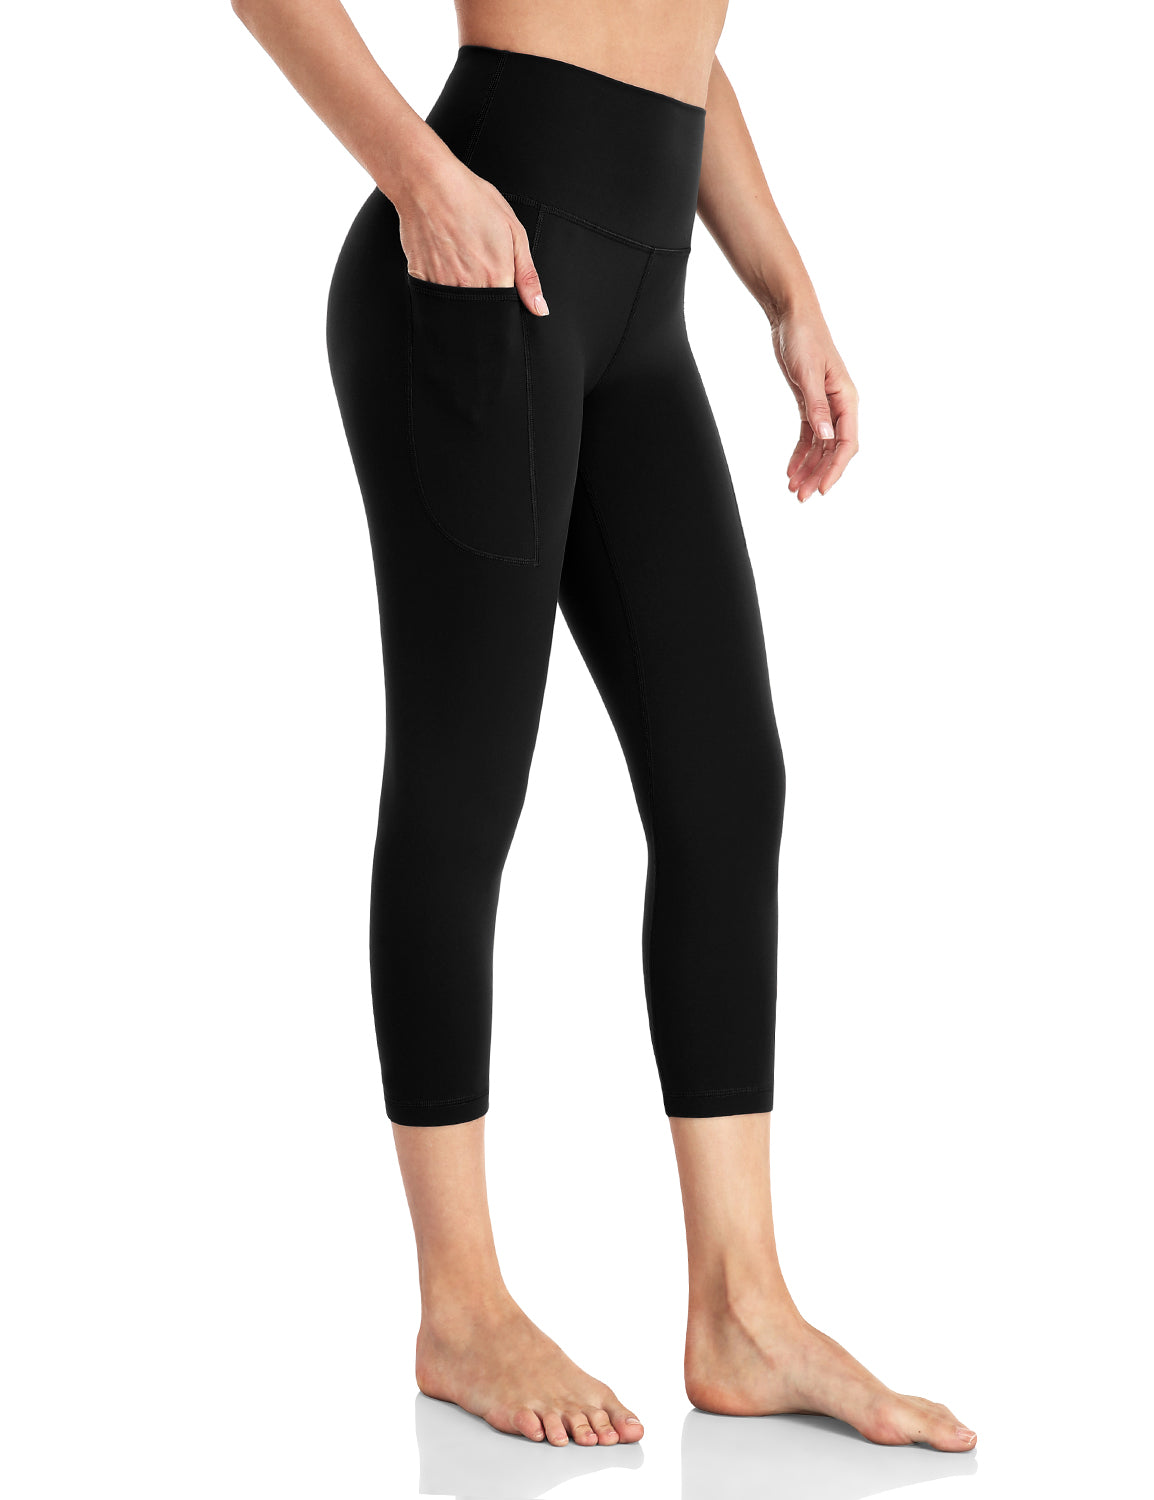 UUE 21Inseam Gray Workout Leggings for Women,Yoga Capris with Pockets